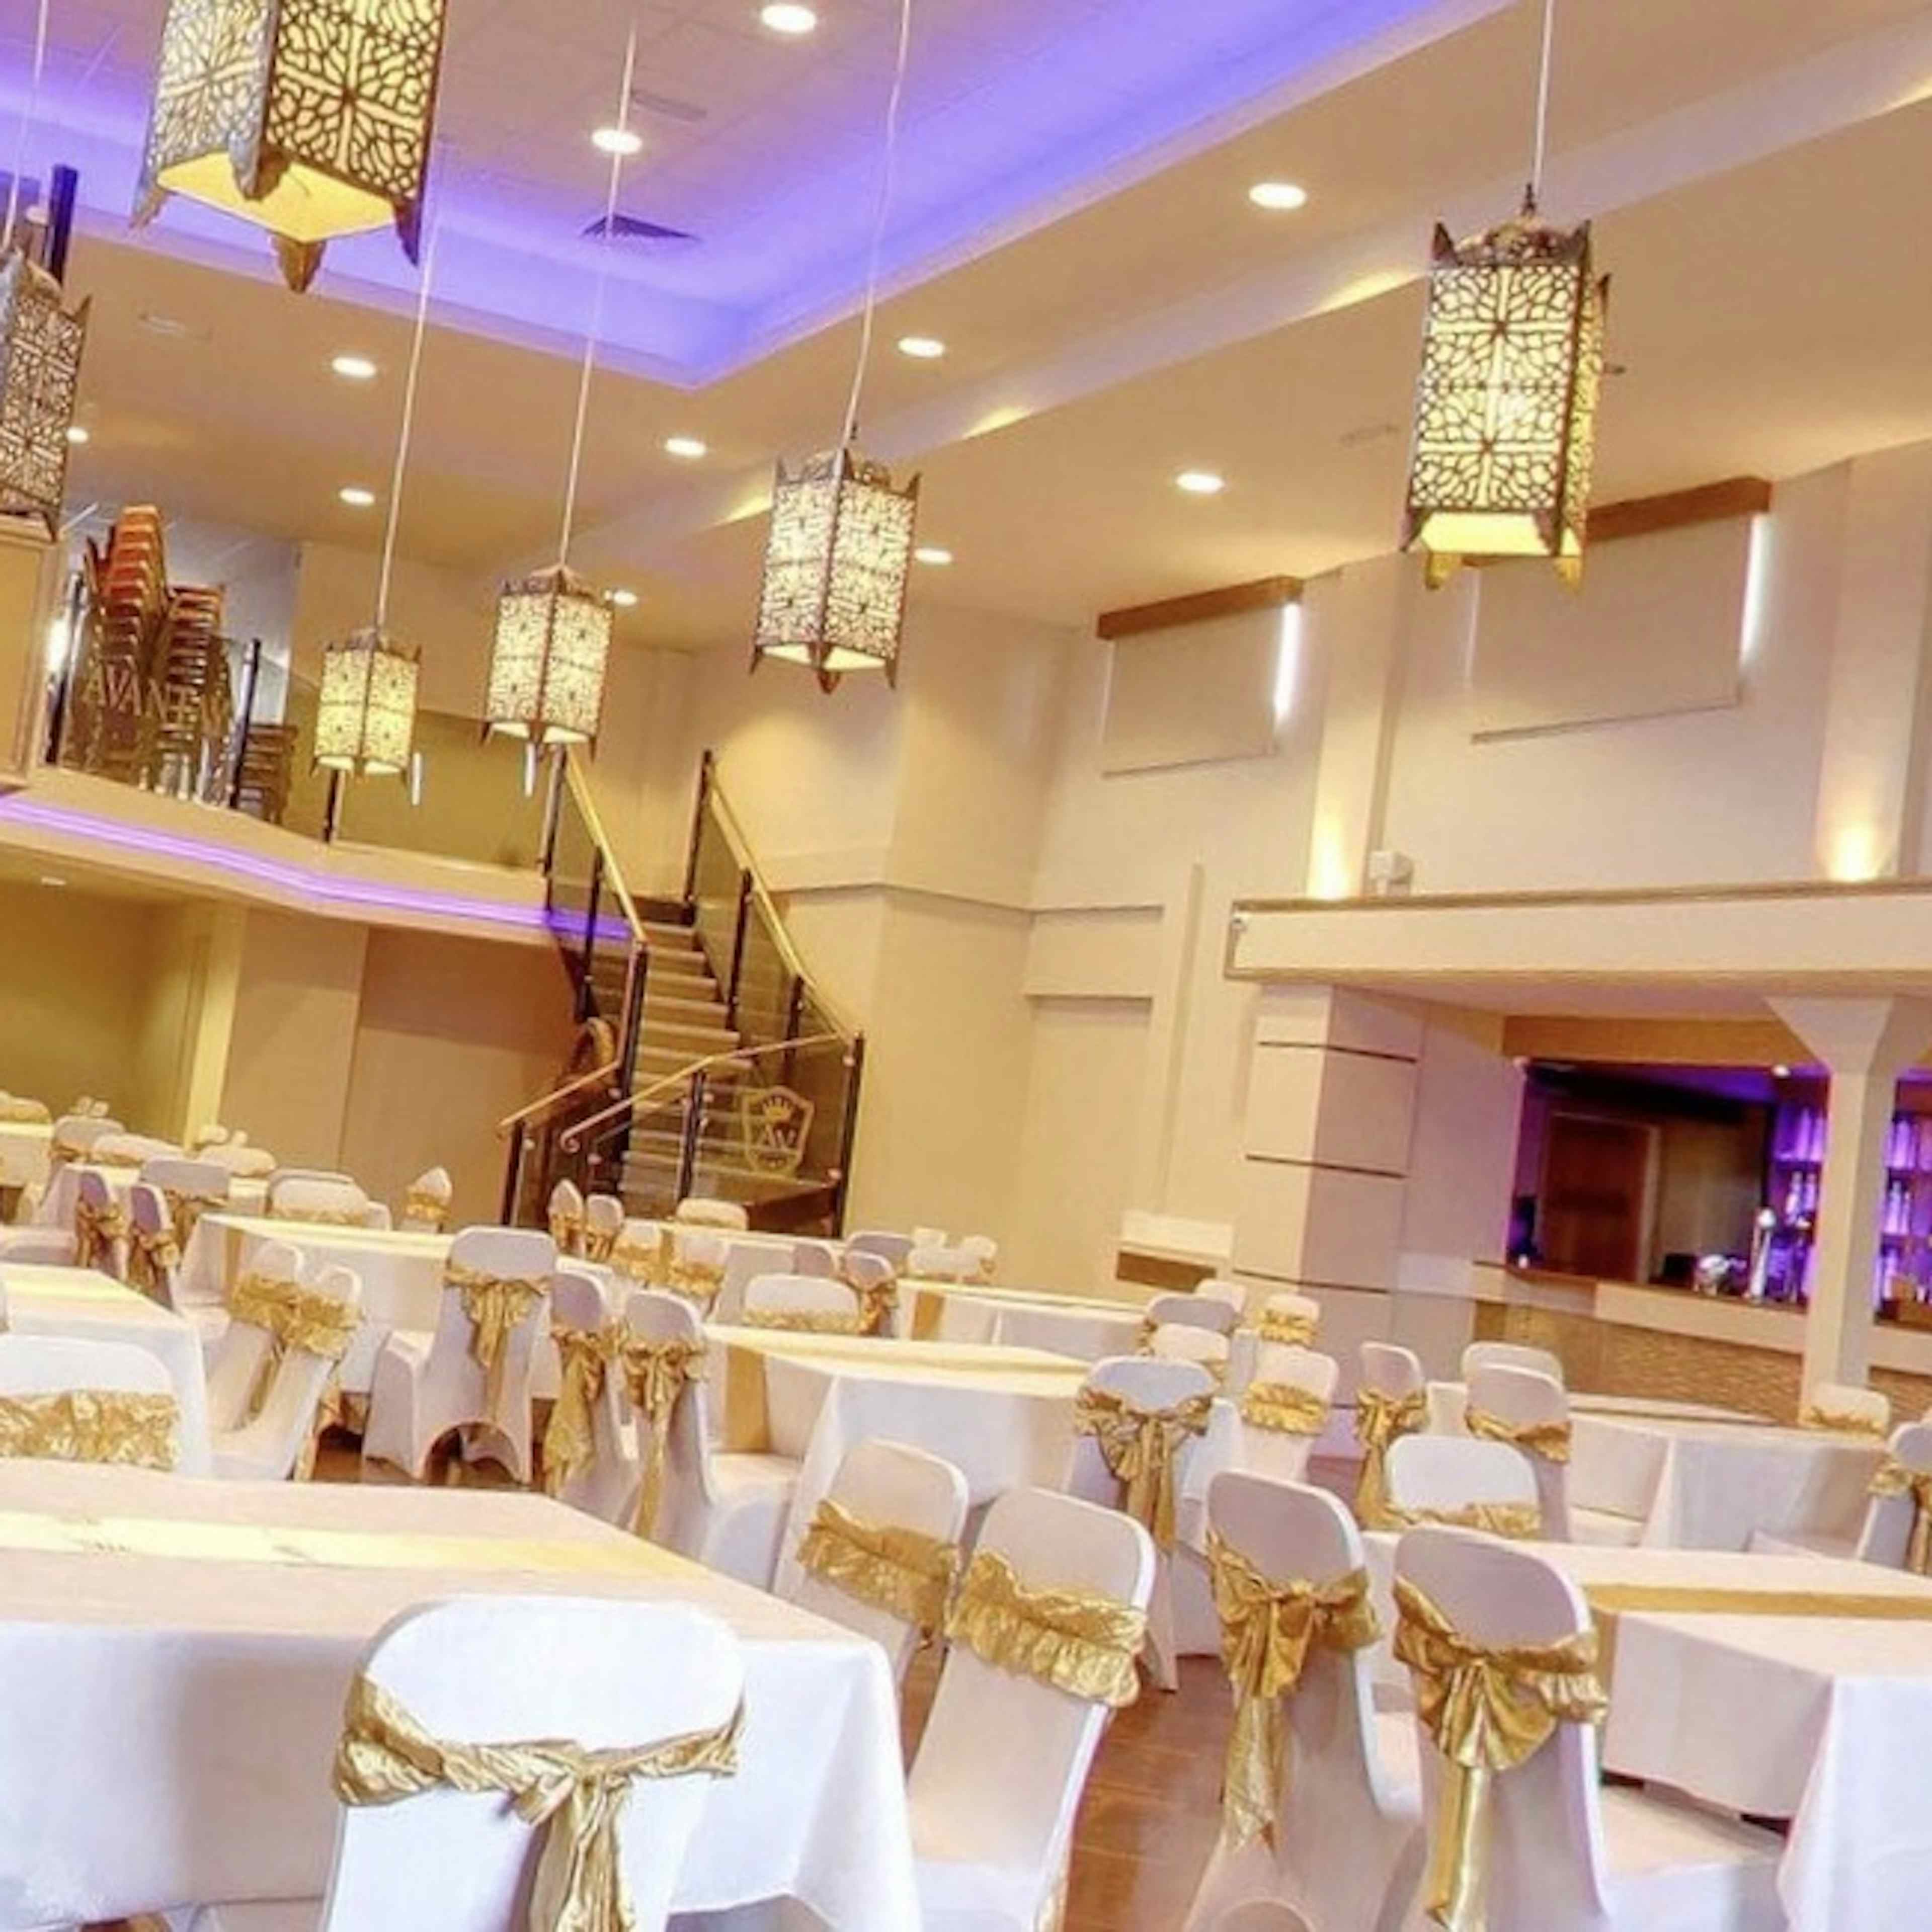 Avantay banqueting suite - Corporate image 2